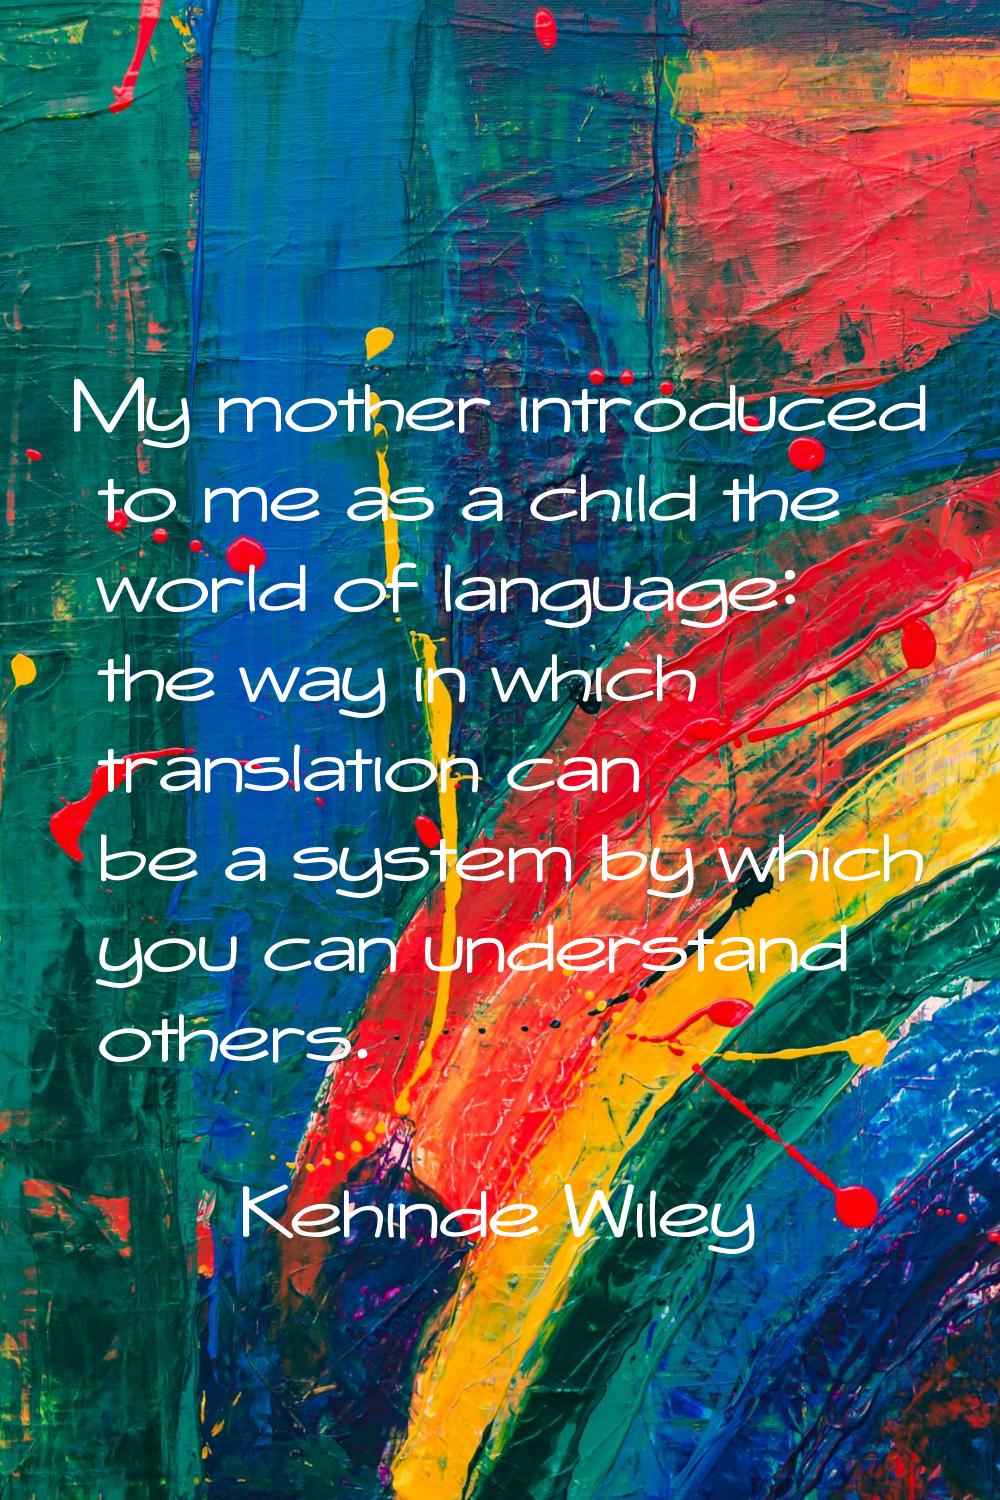 My mother introduced to me as a child the world of language: the way in which translation can be a 